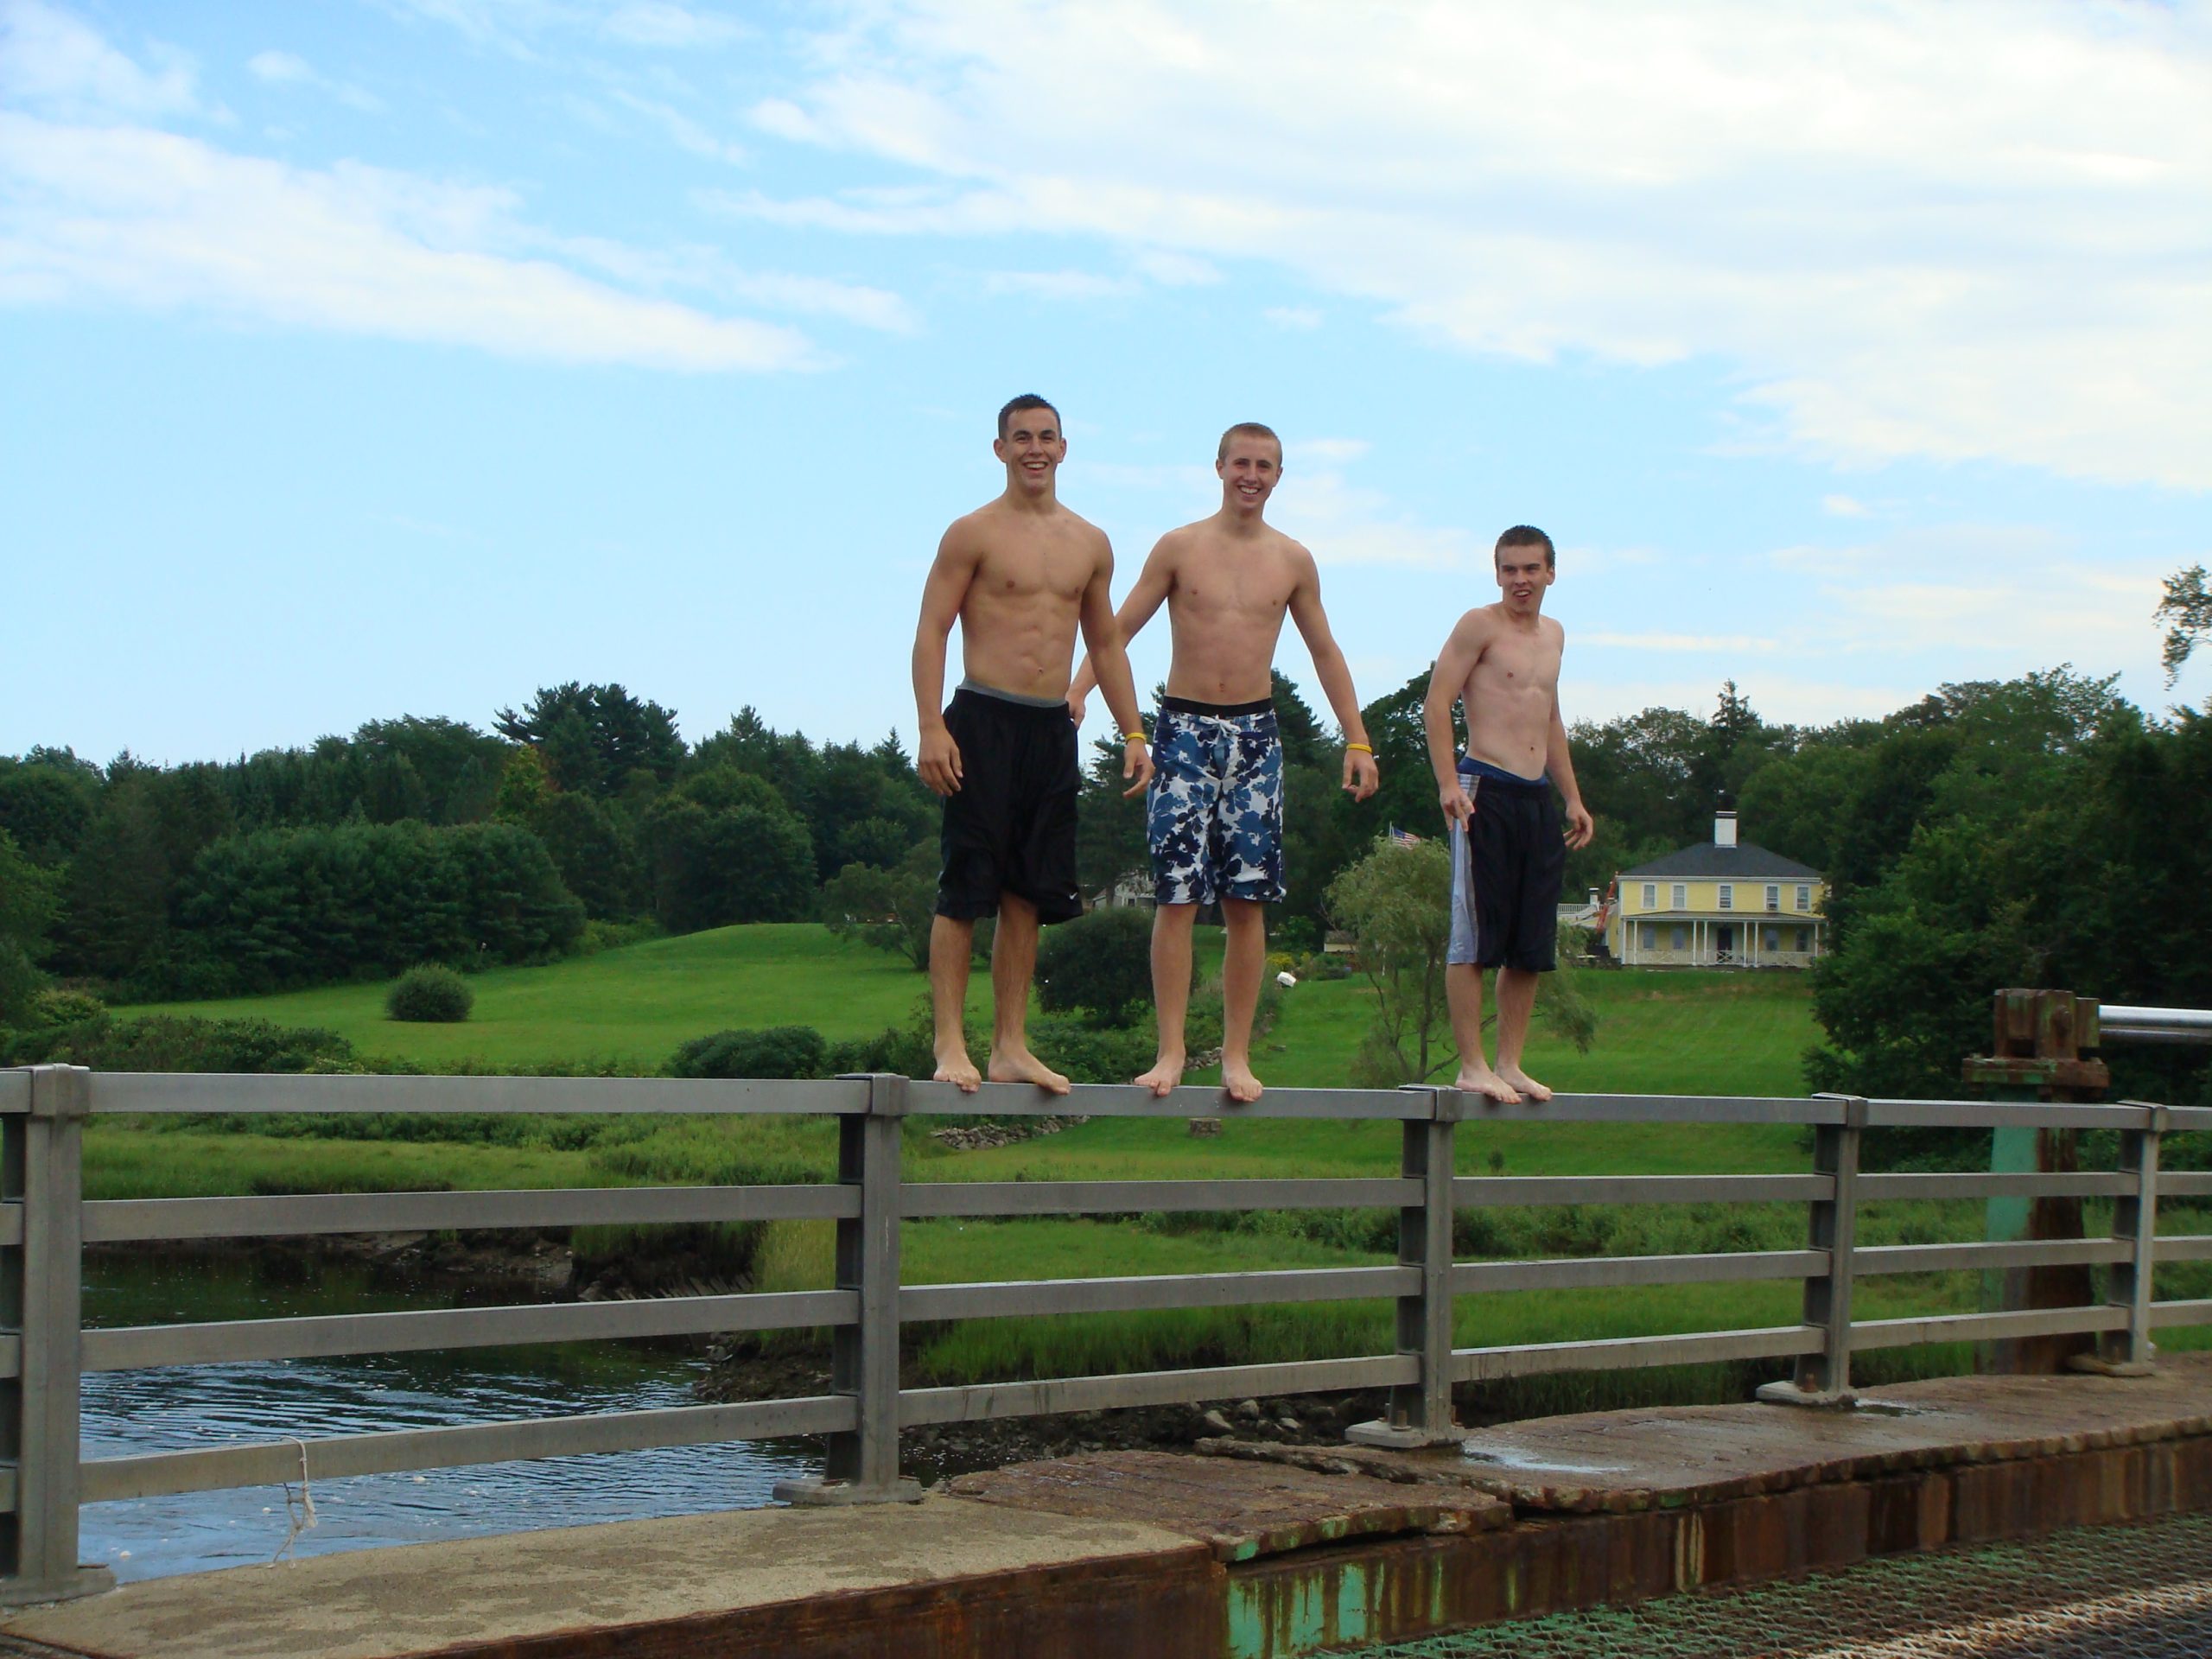 Boys On The Bridge (user submitted)